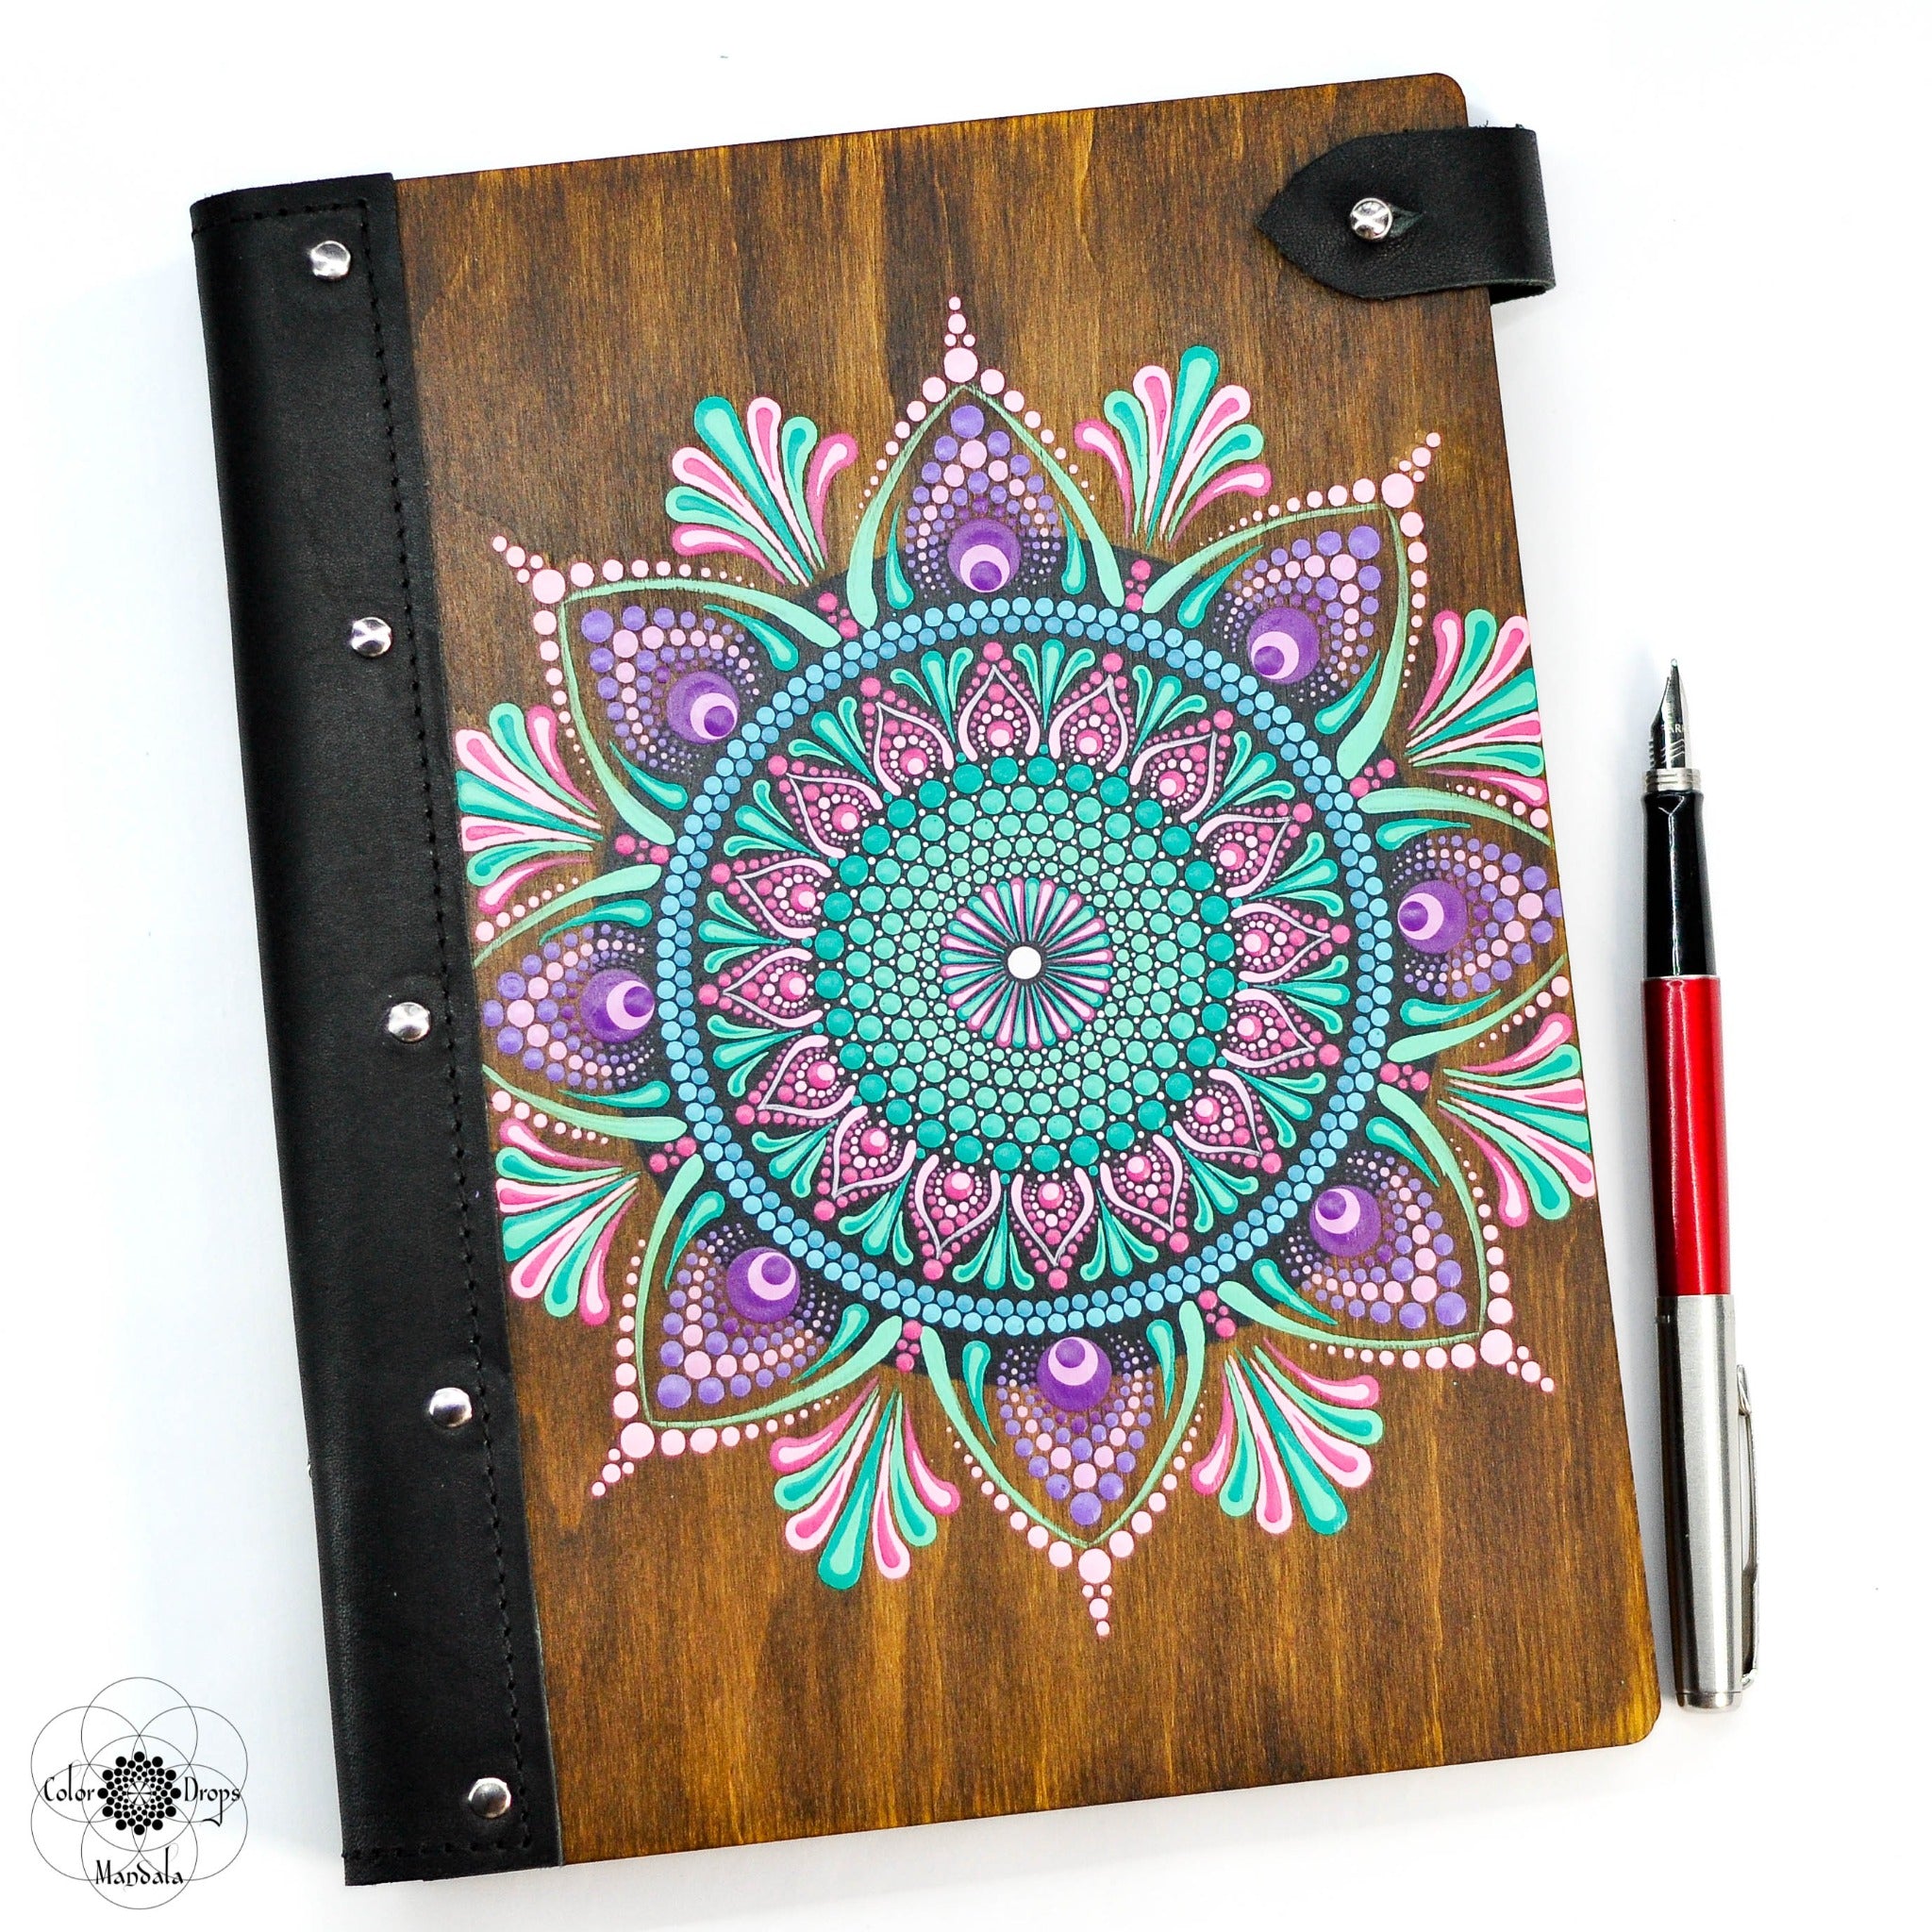 "Free spirit" hand-painted refillable diary